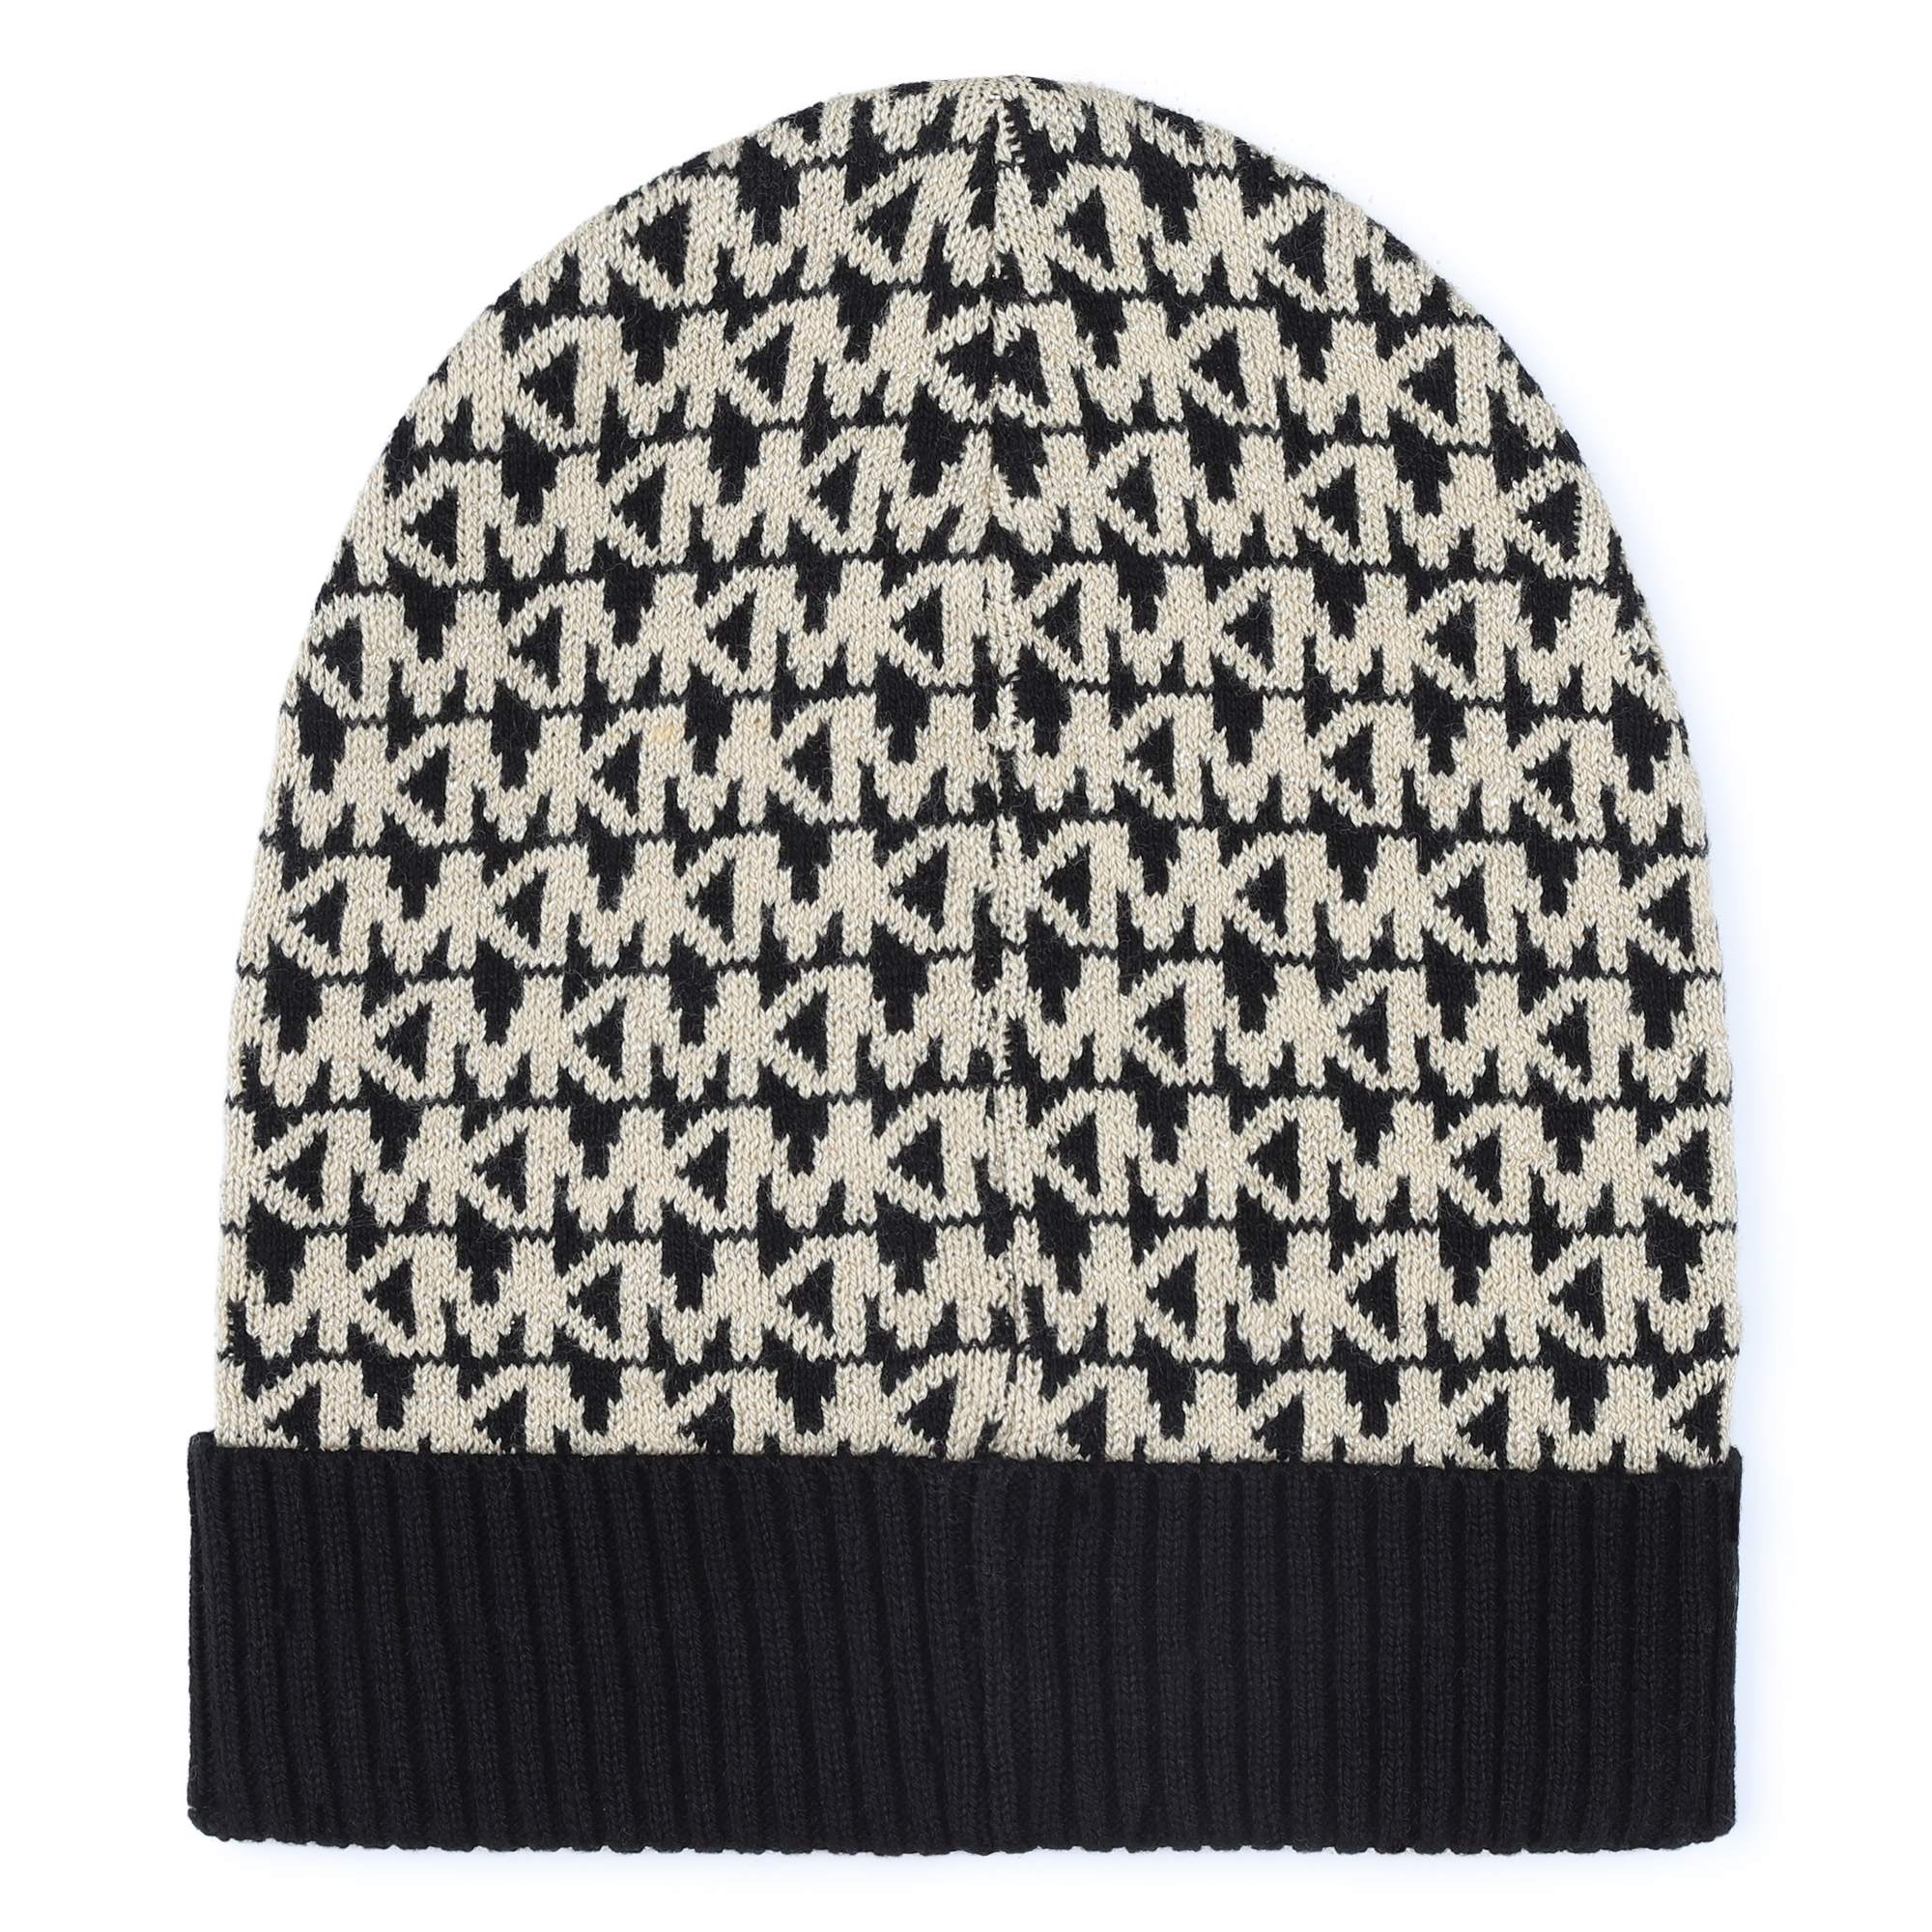 Cotton and wool jacquard hat MICHAEL KORS for GIRL